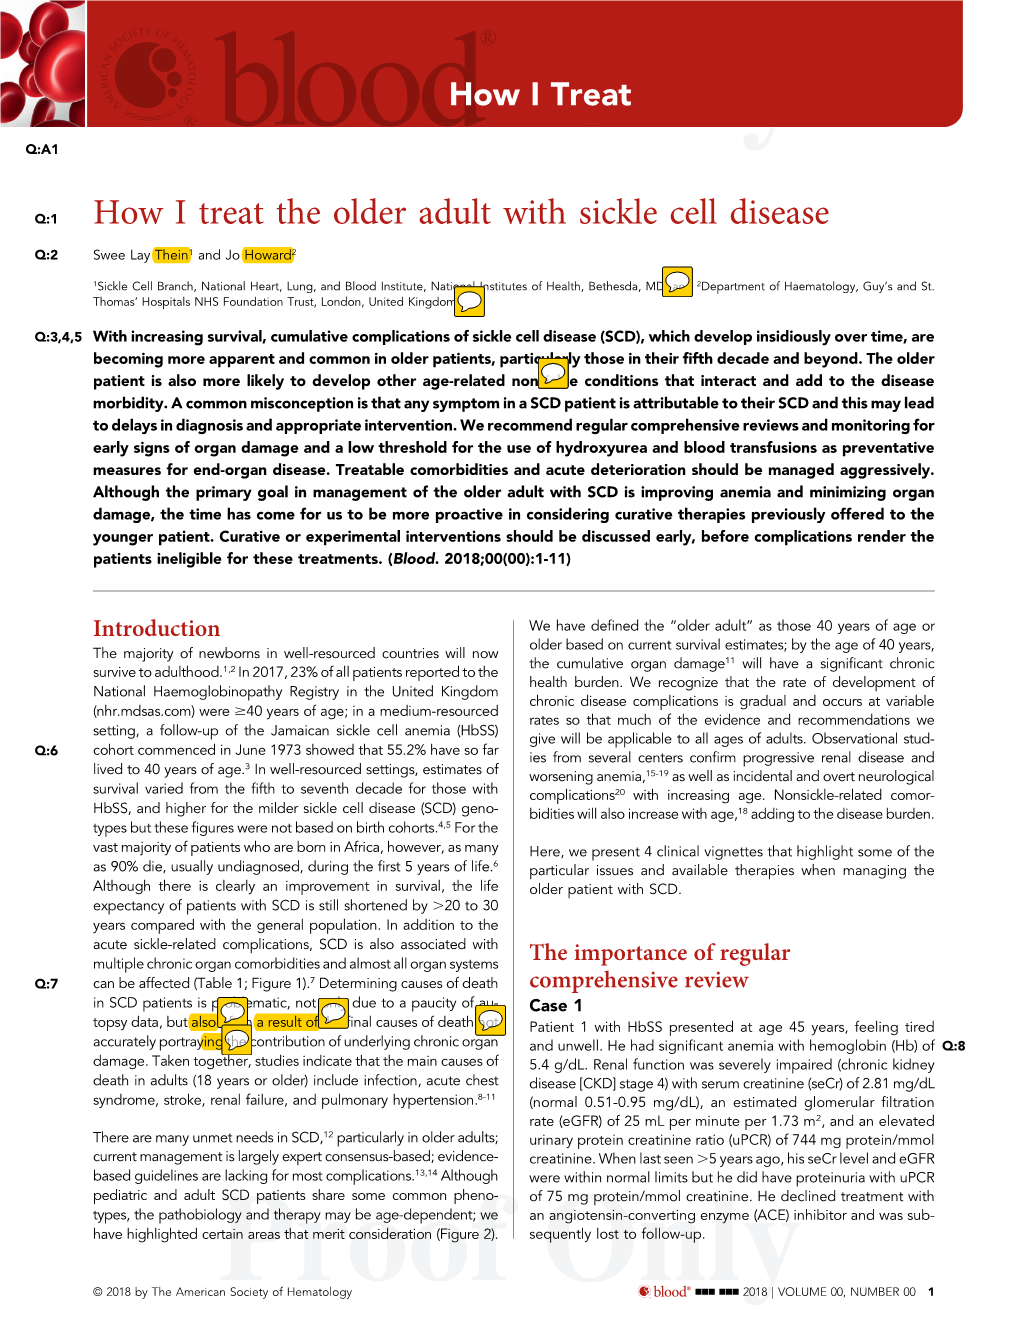 How I Treat the Older Adult with Sickle Cell Disease